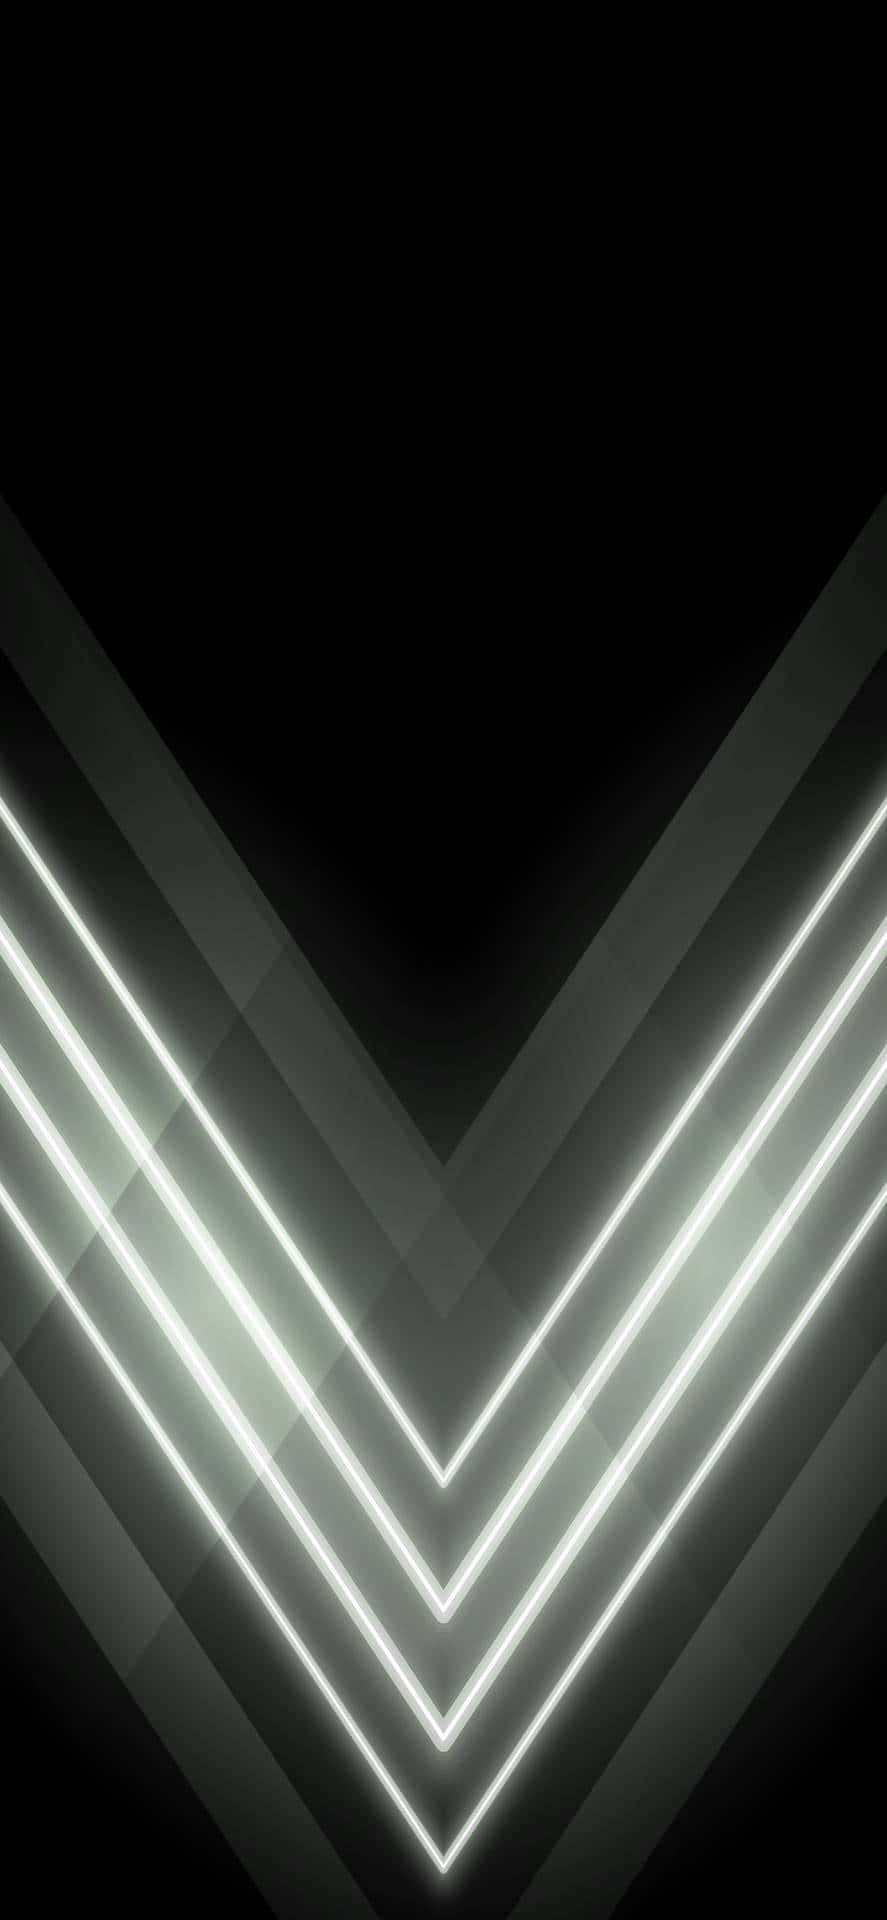 Download Brighten up your day with vibrant White Neon Wallpaper   Wallpaperscom